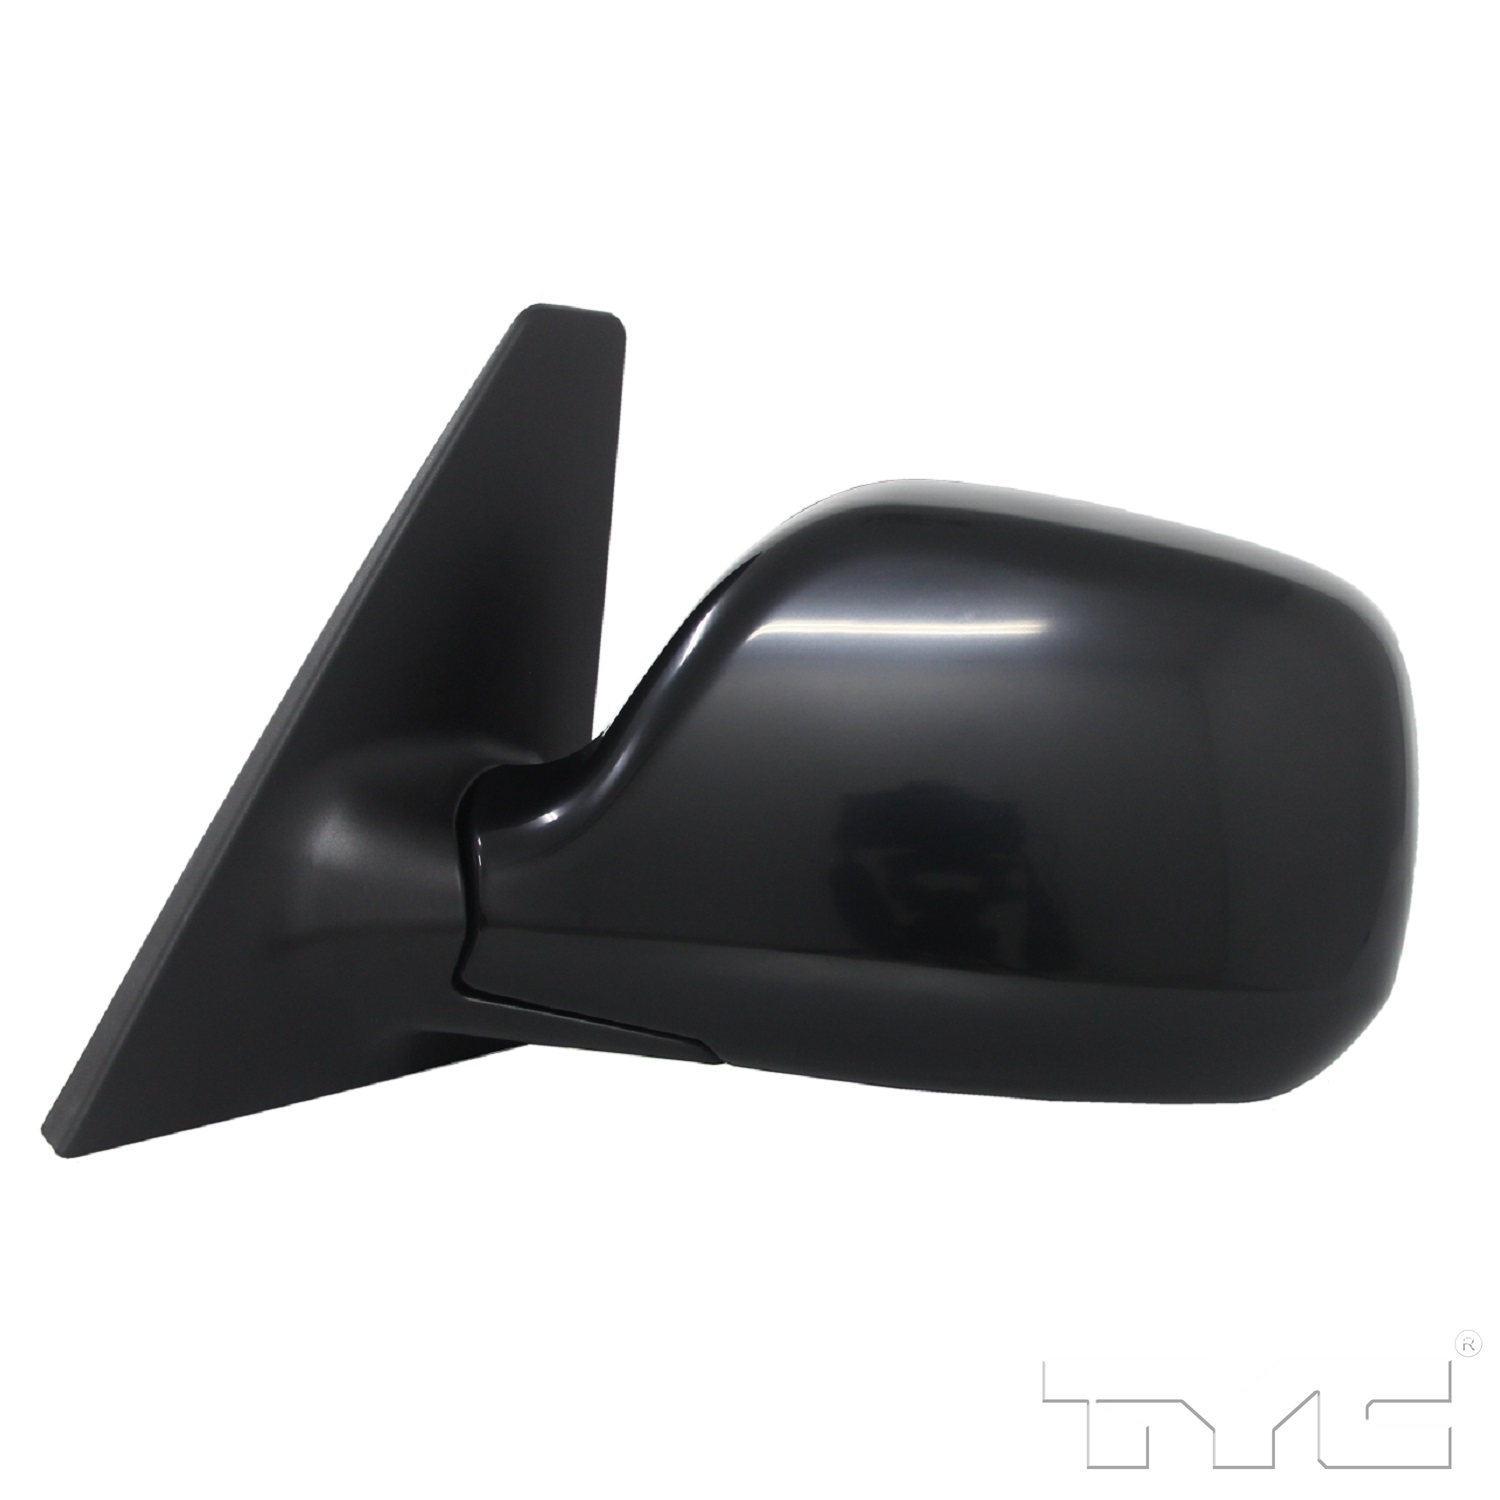 Aftermarket MIRRORS for SCION - XB, xB,04-06,LT Mirror outside rear view